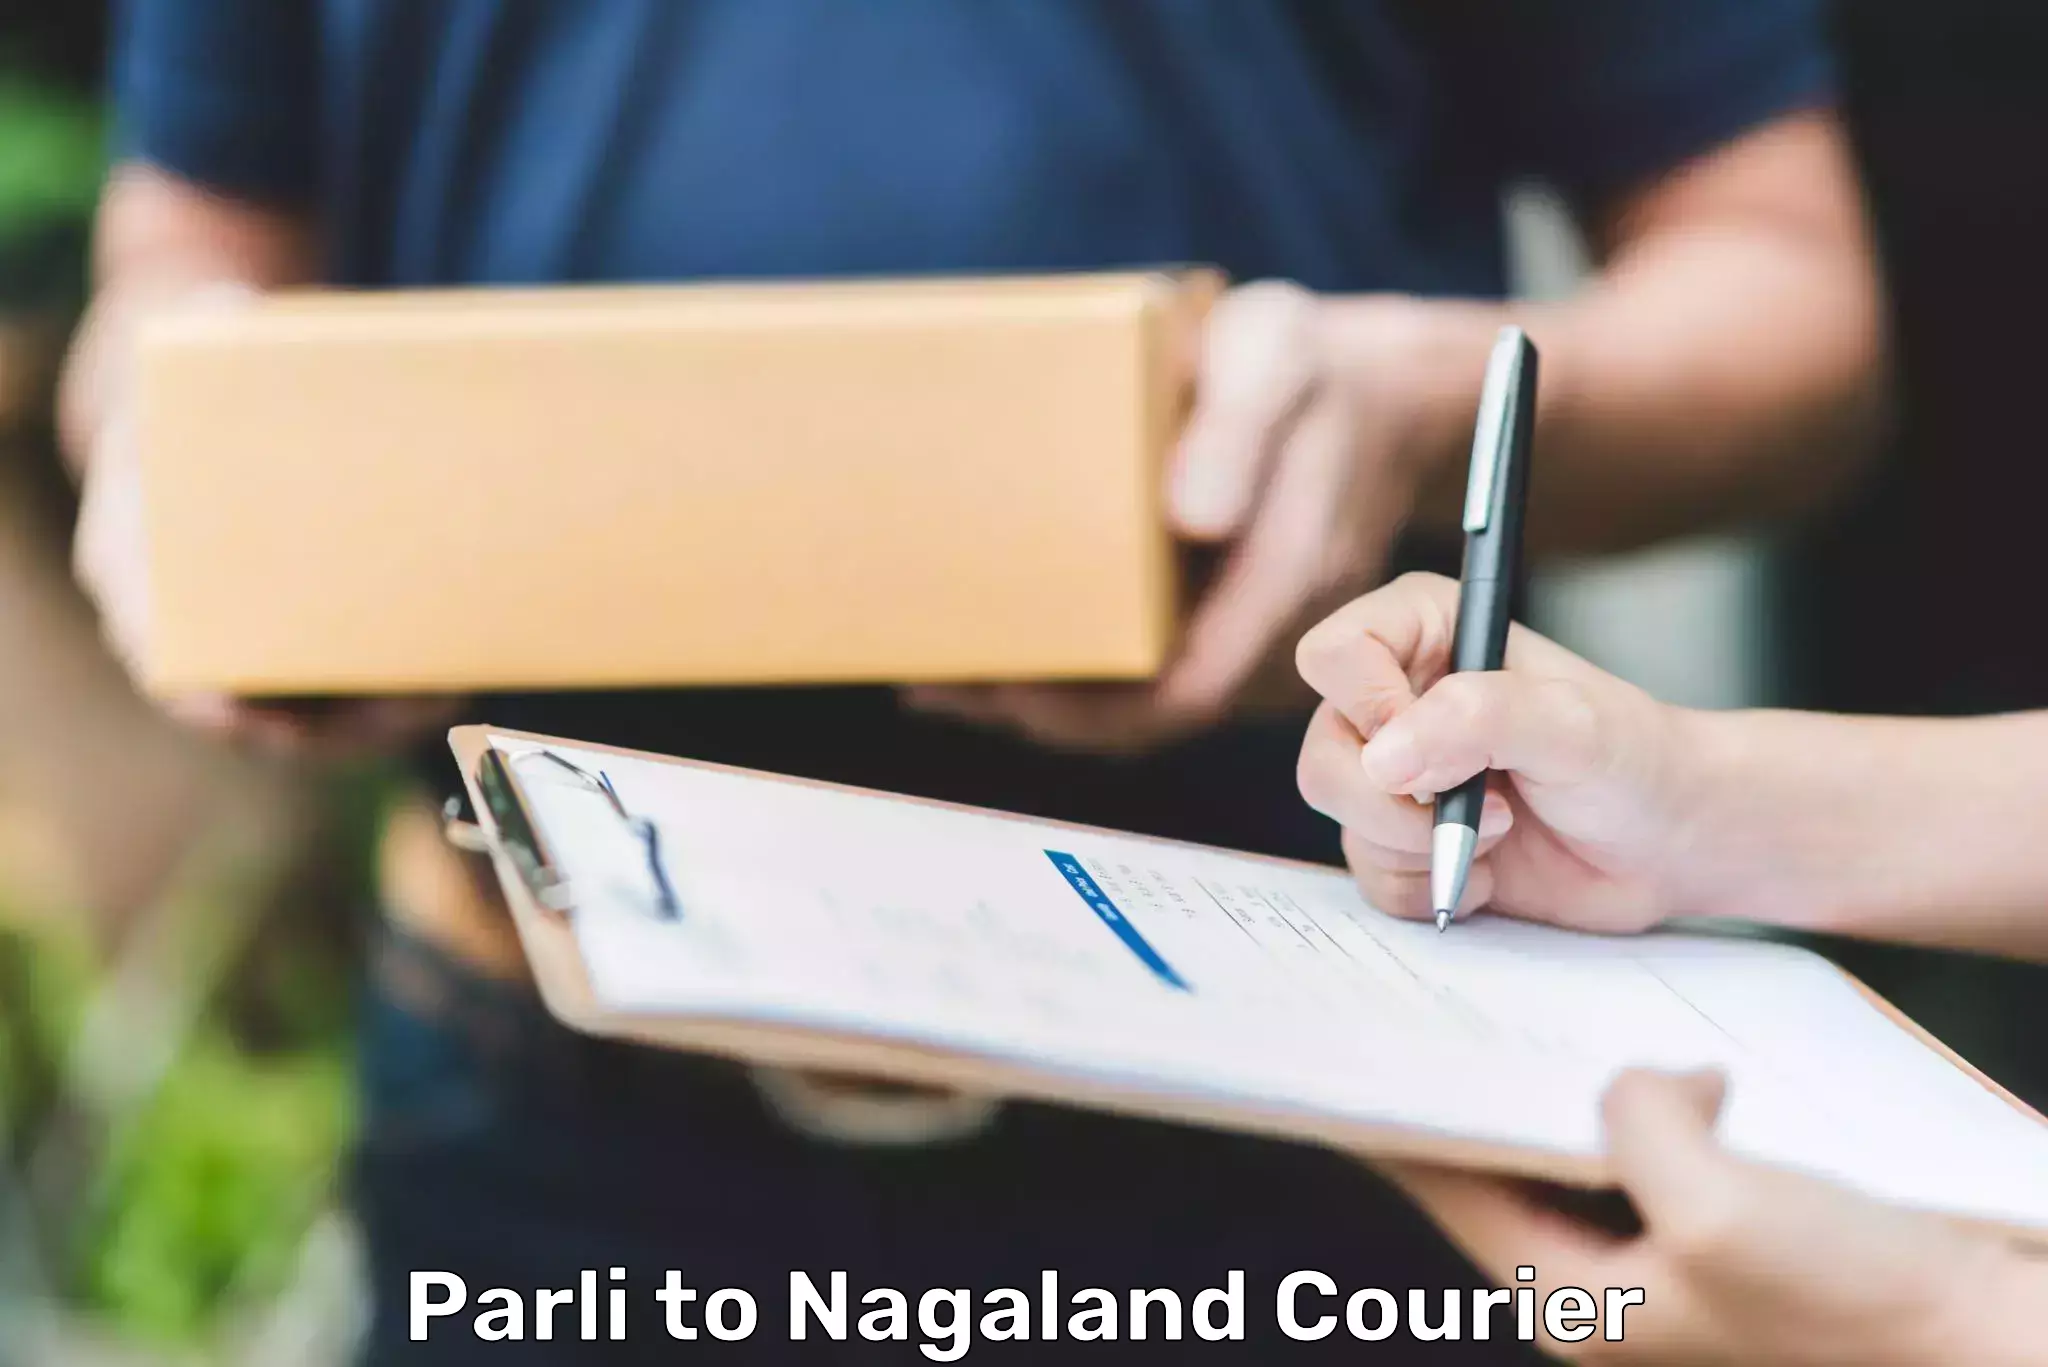 Reliable delivery network Parli to NIT Nagaland